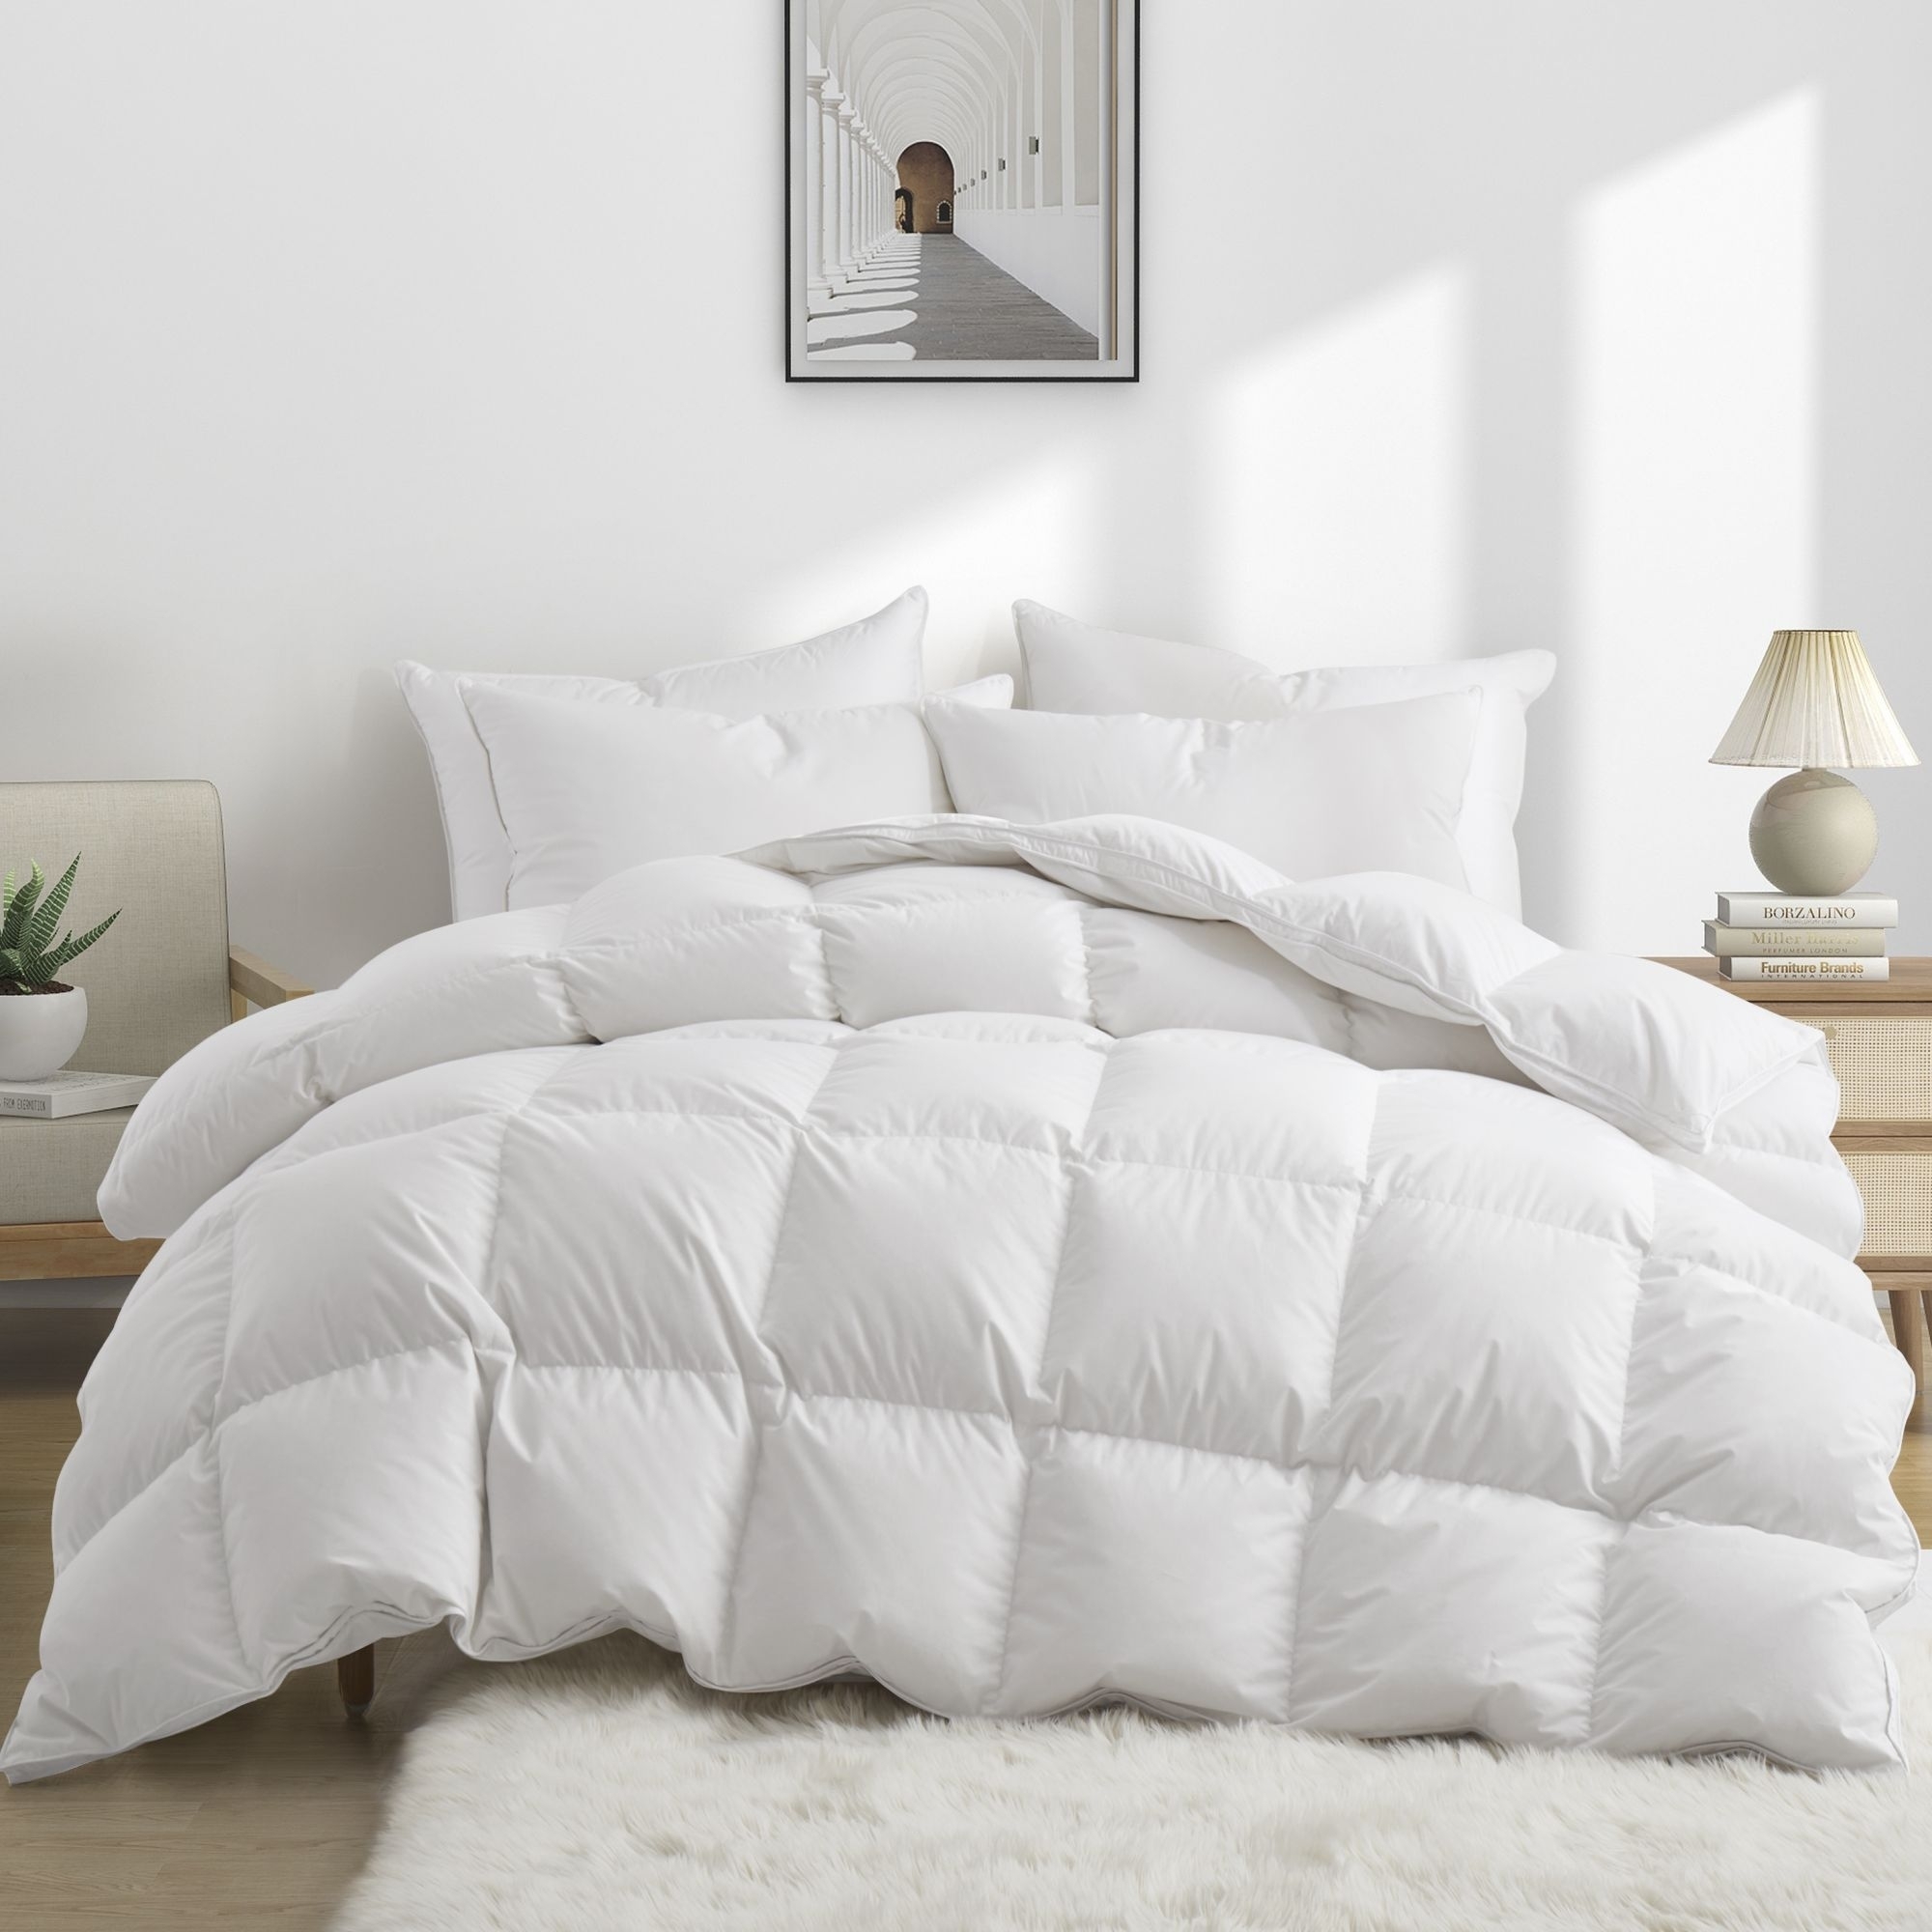 Made In Germany 800 Fill Power Luxurious European White Down Comforter-Heavy Weight Comforter& Medium Weight Comforter - Heavyweight, Full/Q